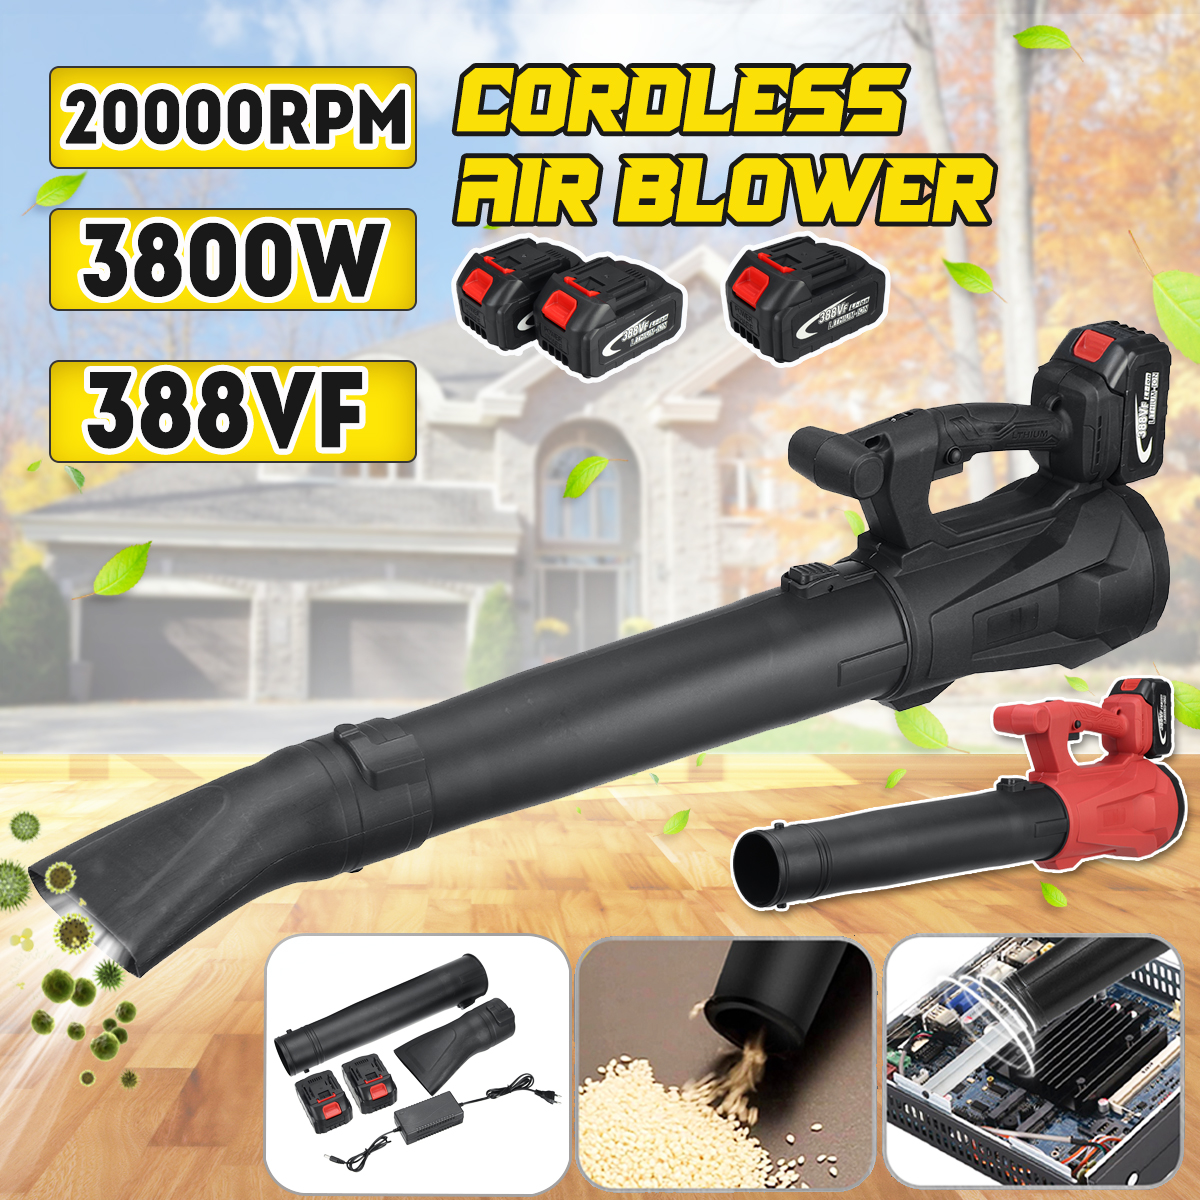 388VF-Cordless-Electric-Air-Blower-Vacuum-Cleannig-Blowing-Dust-Collector-Leaf-Blower-W-None12-Batte-1867747-2